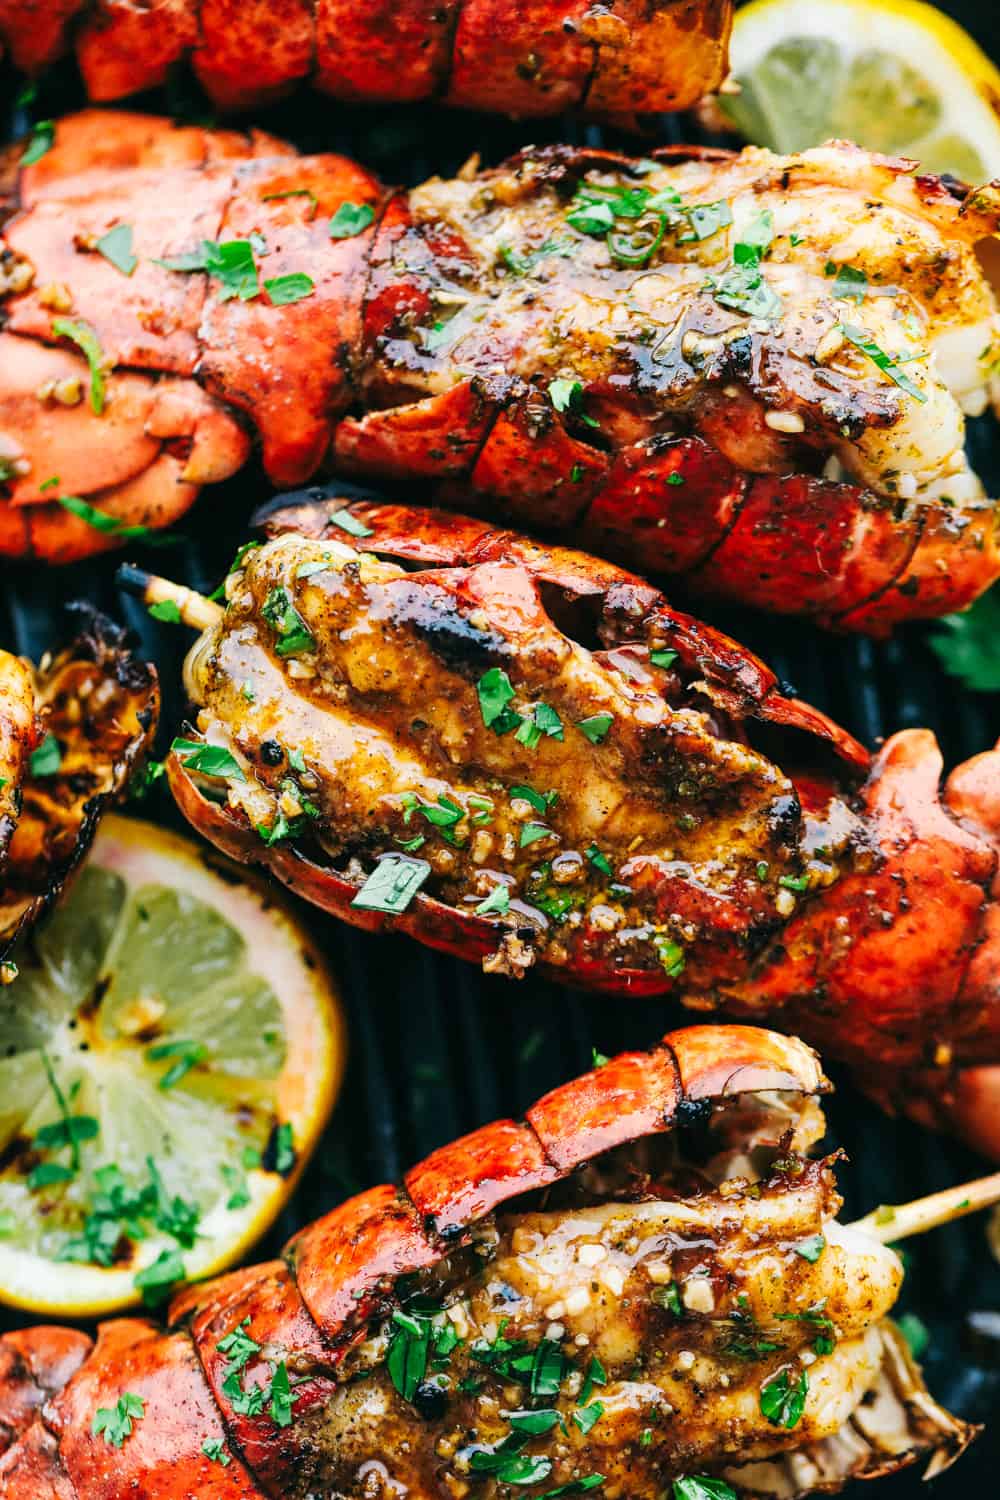 Grilled Lobster Tails Recipe